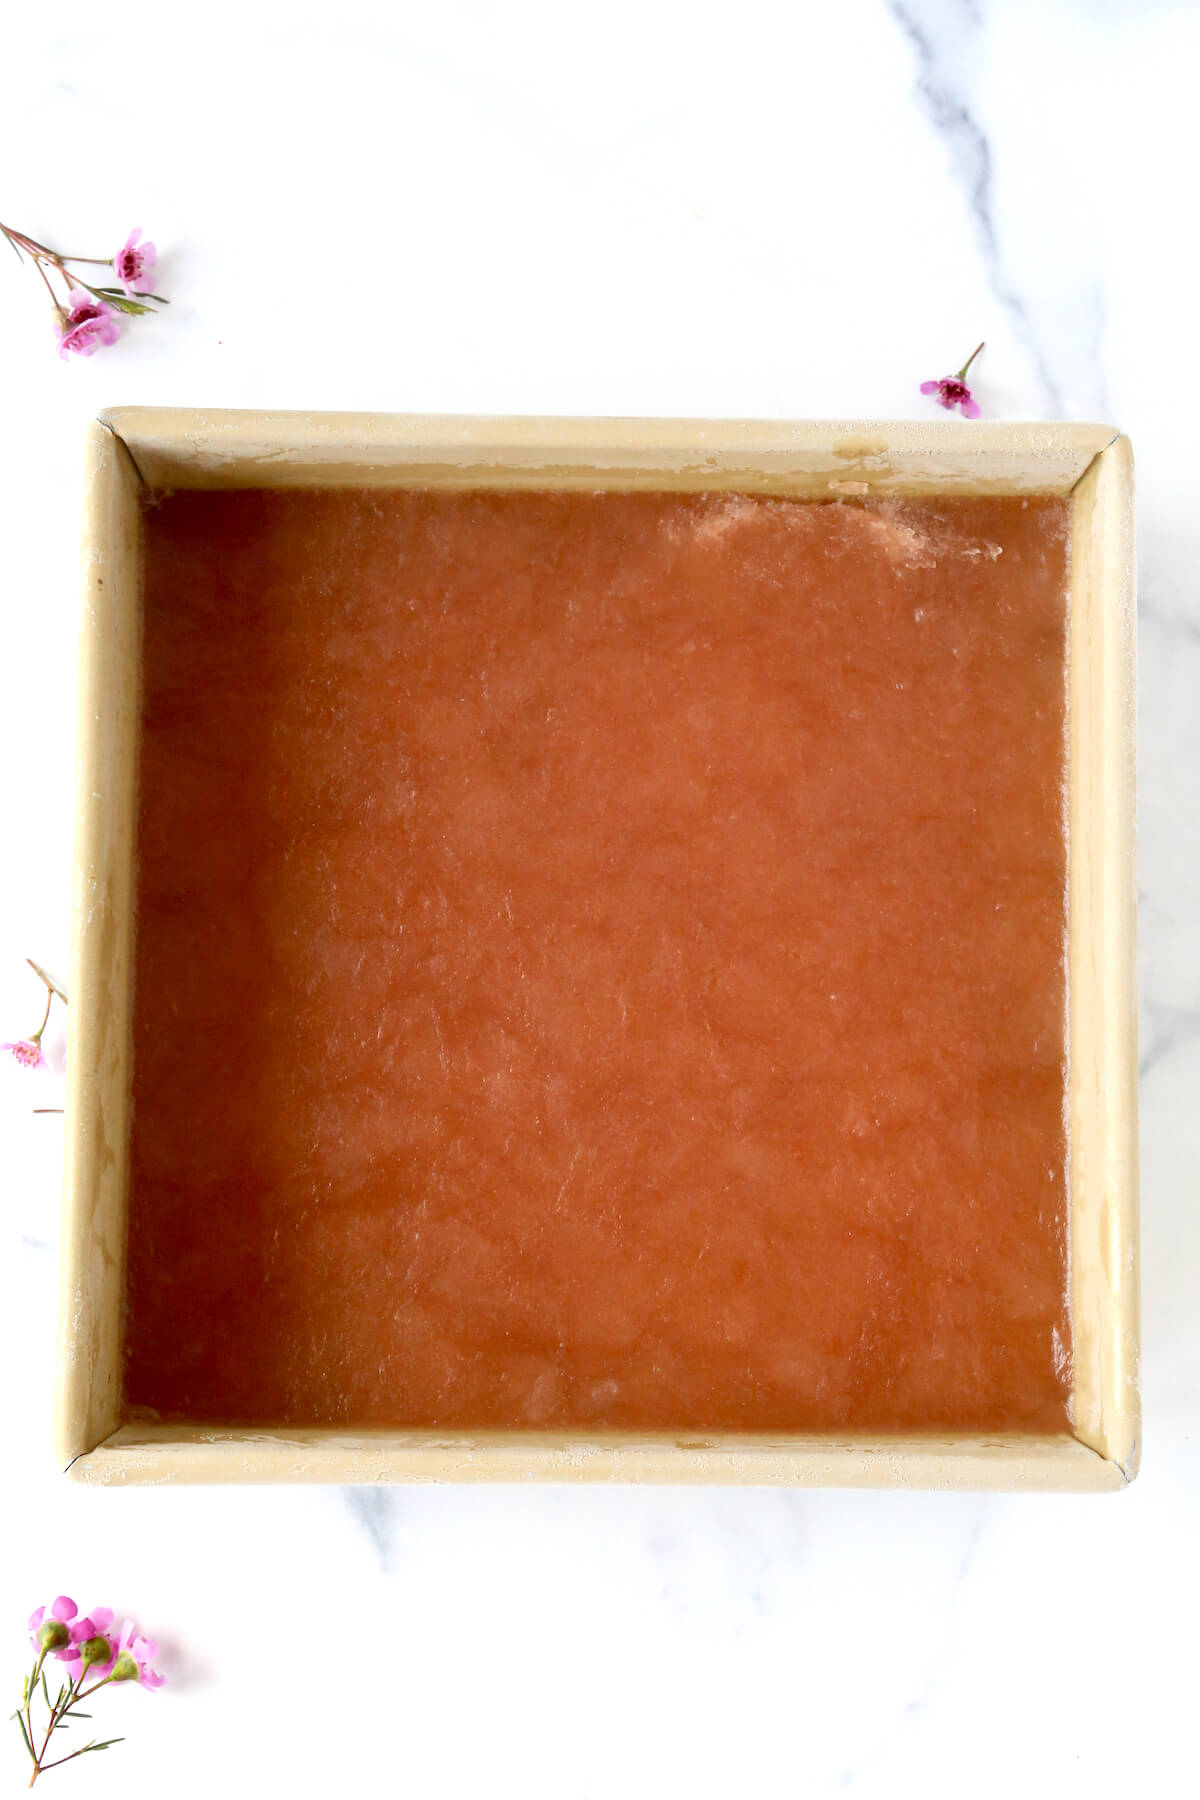 A square pan filled with a pink frozen liquid.